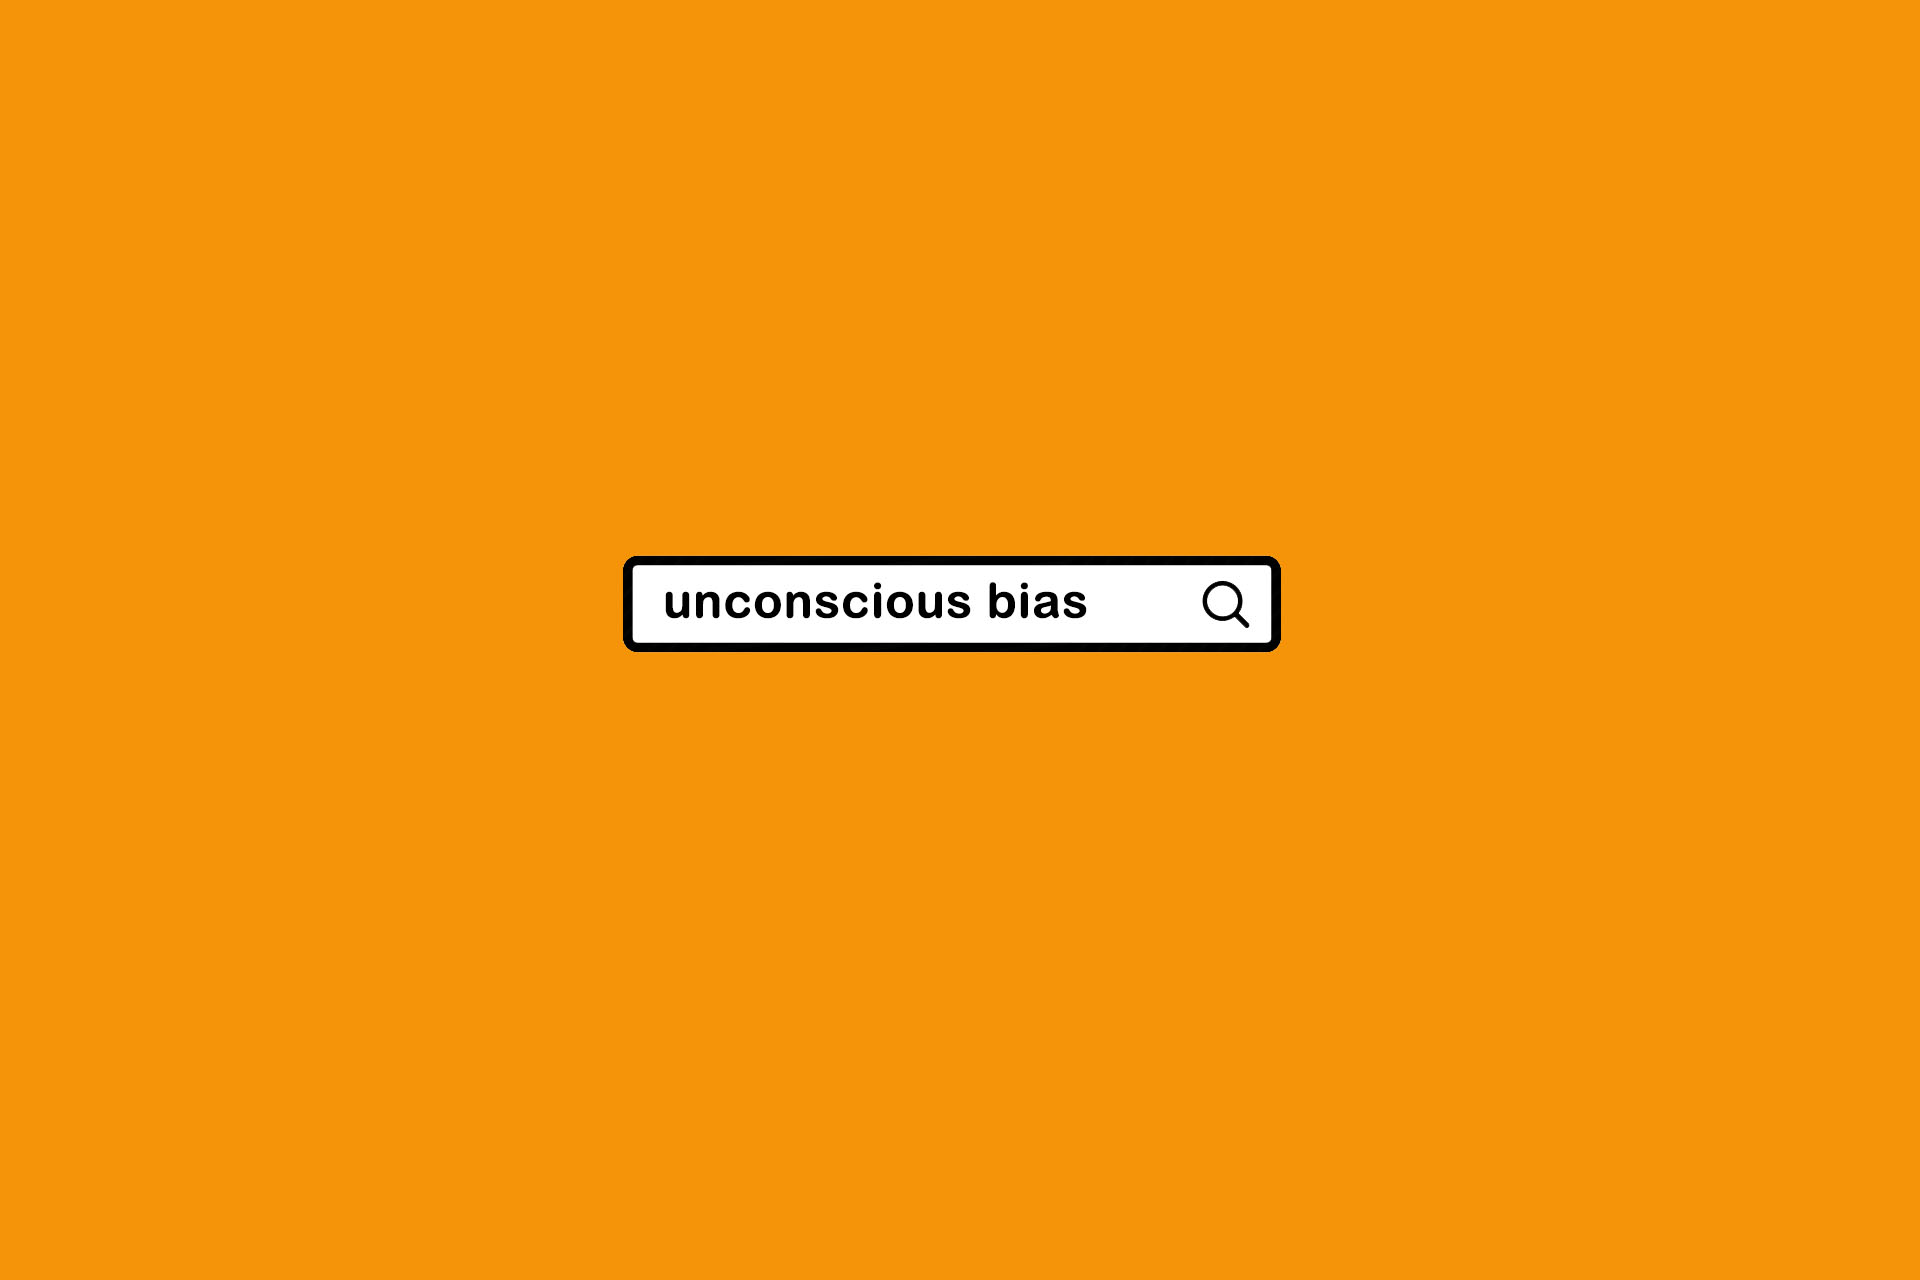 t2informatik Blog: Unconscious biases - the world in our heads